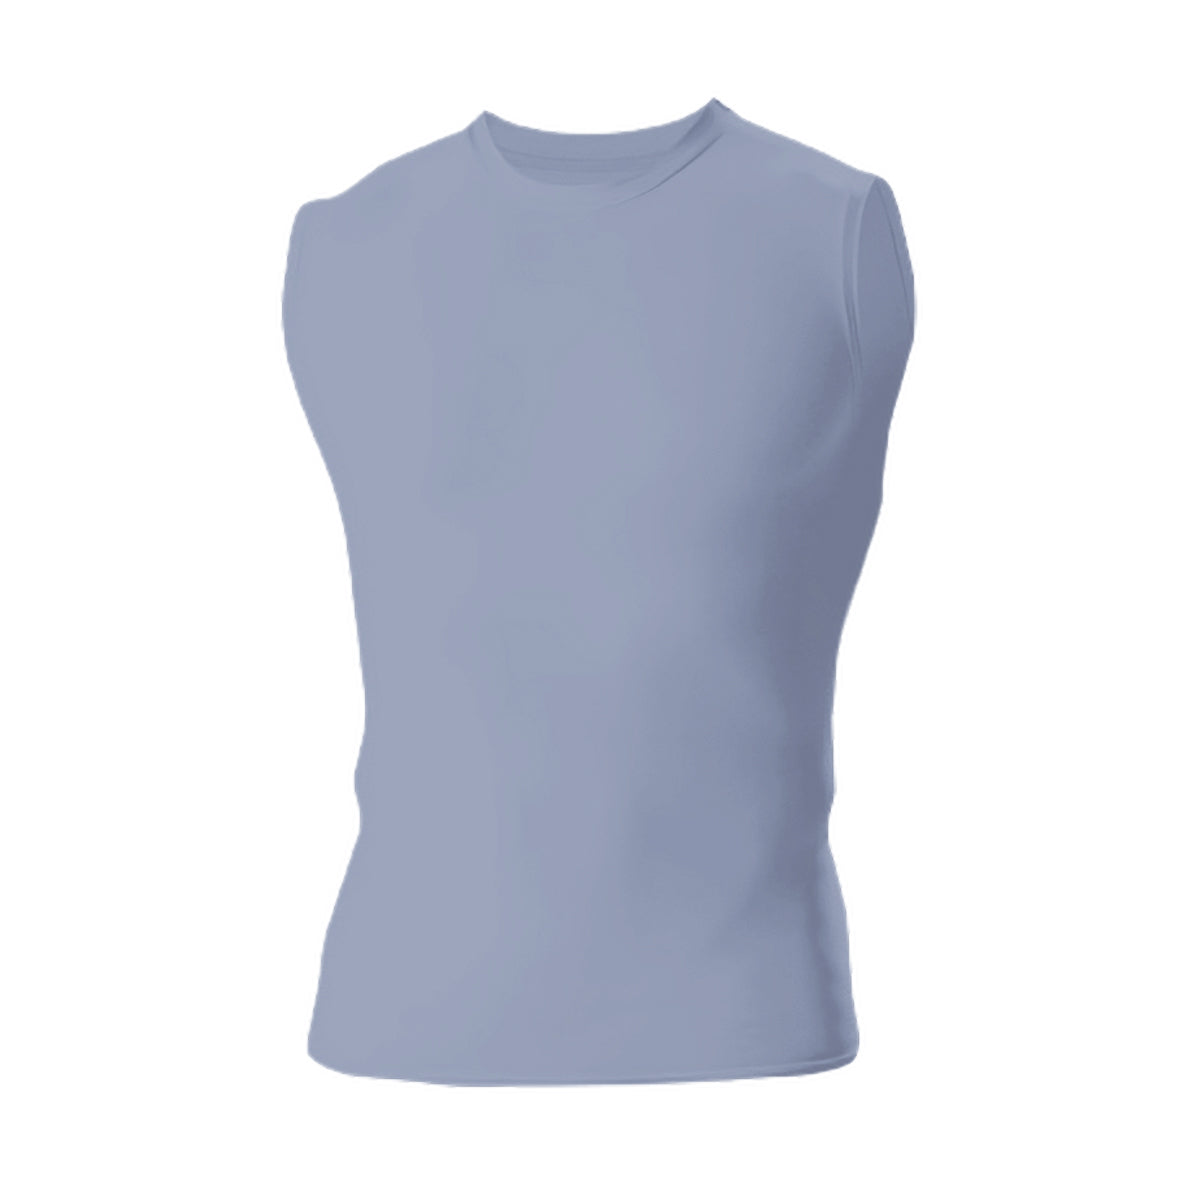 HercShirt 3.0 - The World's Cleanest Tank Top